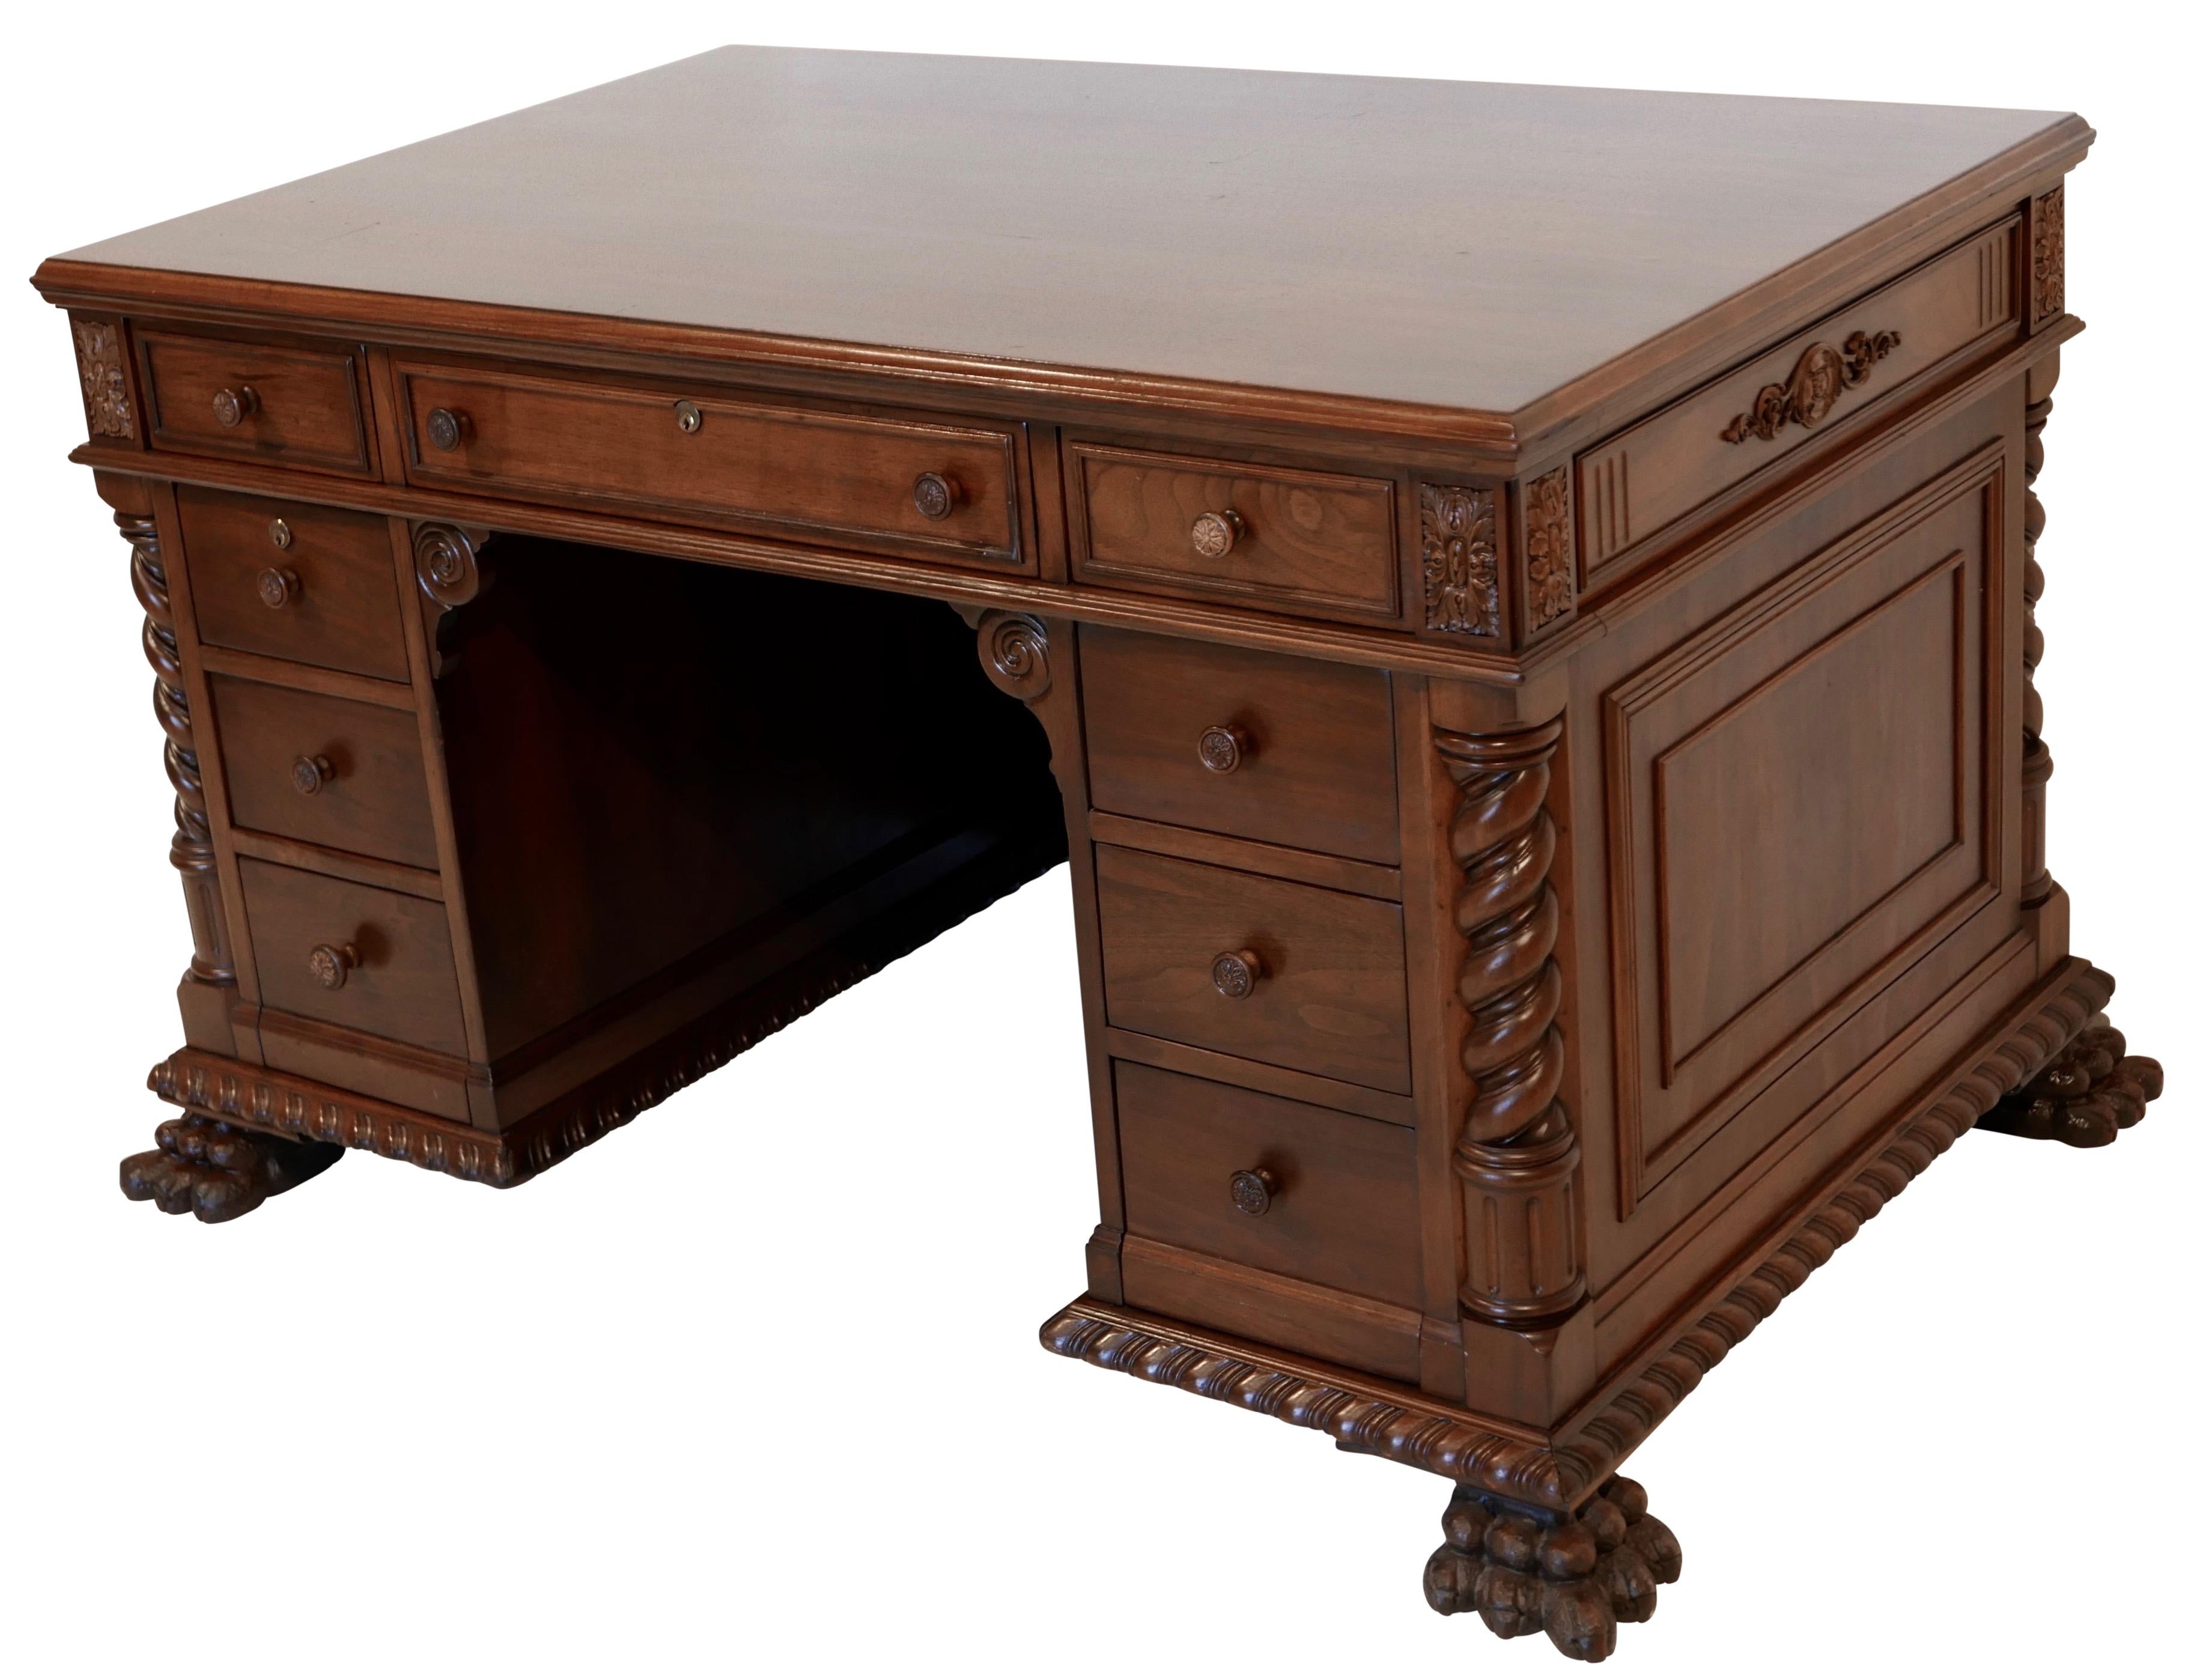 Unique executive walnut desk with decorative corner spiral columns, moulded panels on three sides, gadrooned base above four large lion paw feet. Locking center drawer flanked by four stacking drawers on either side, one drawer on the left side